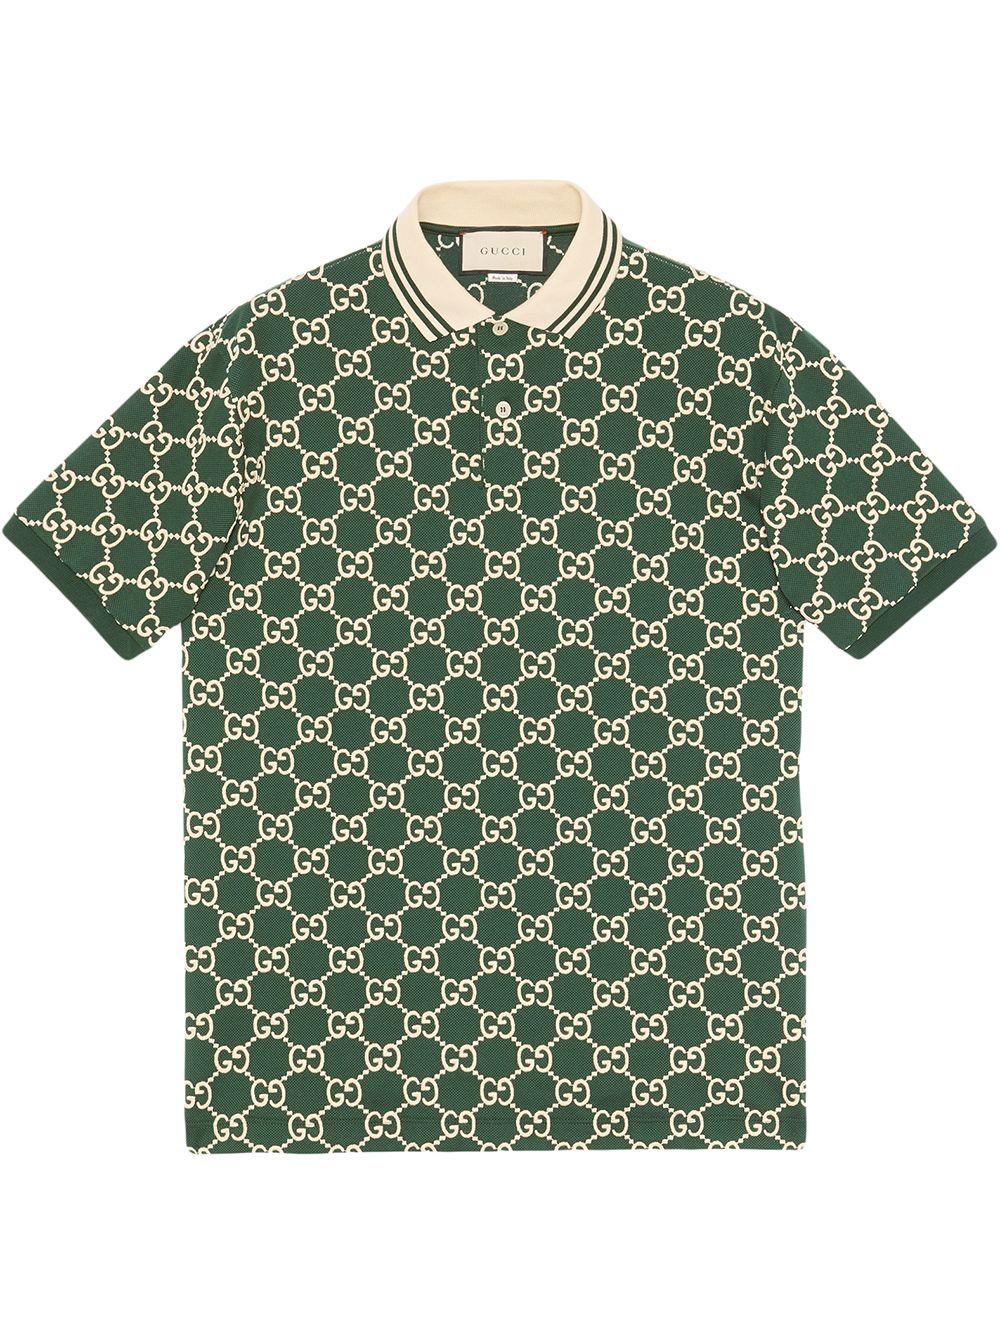 manuskript chap Med det samme Gucci GG Stretch Cotton Polo in Green for Men - Lyst